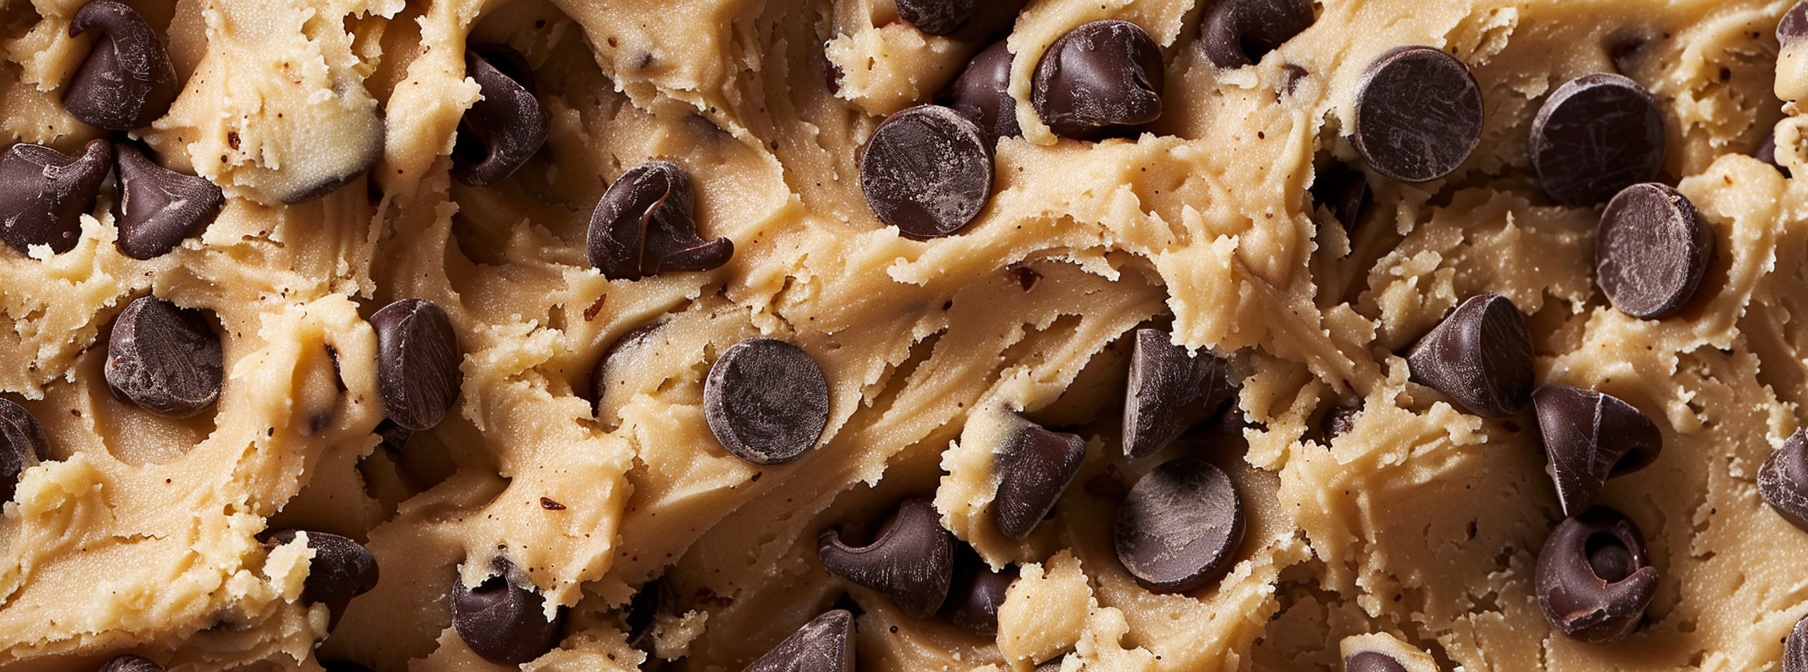 Doughlicious-Delights-Ready-To-Eat-Cookie-Dough-Flavors-Steal-The-Show